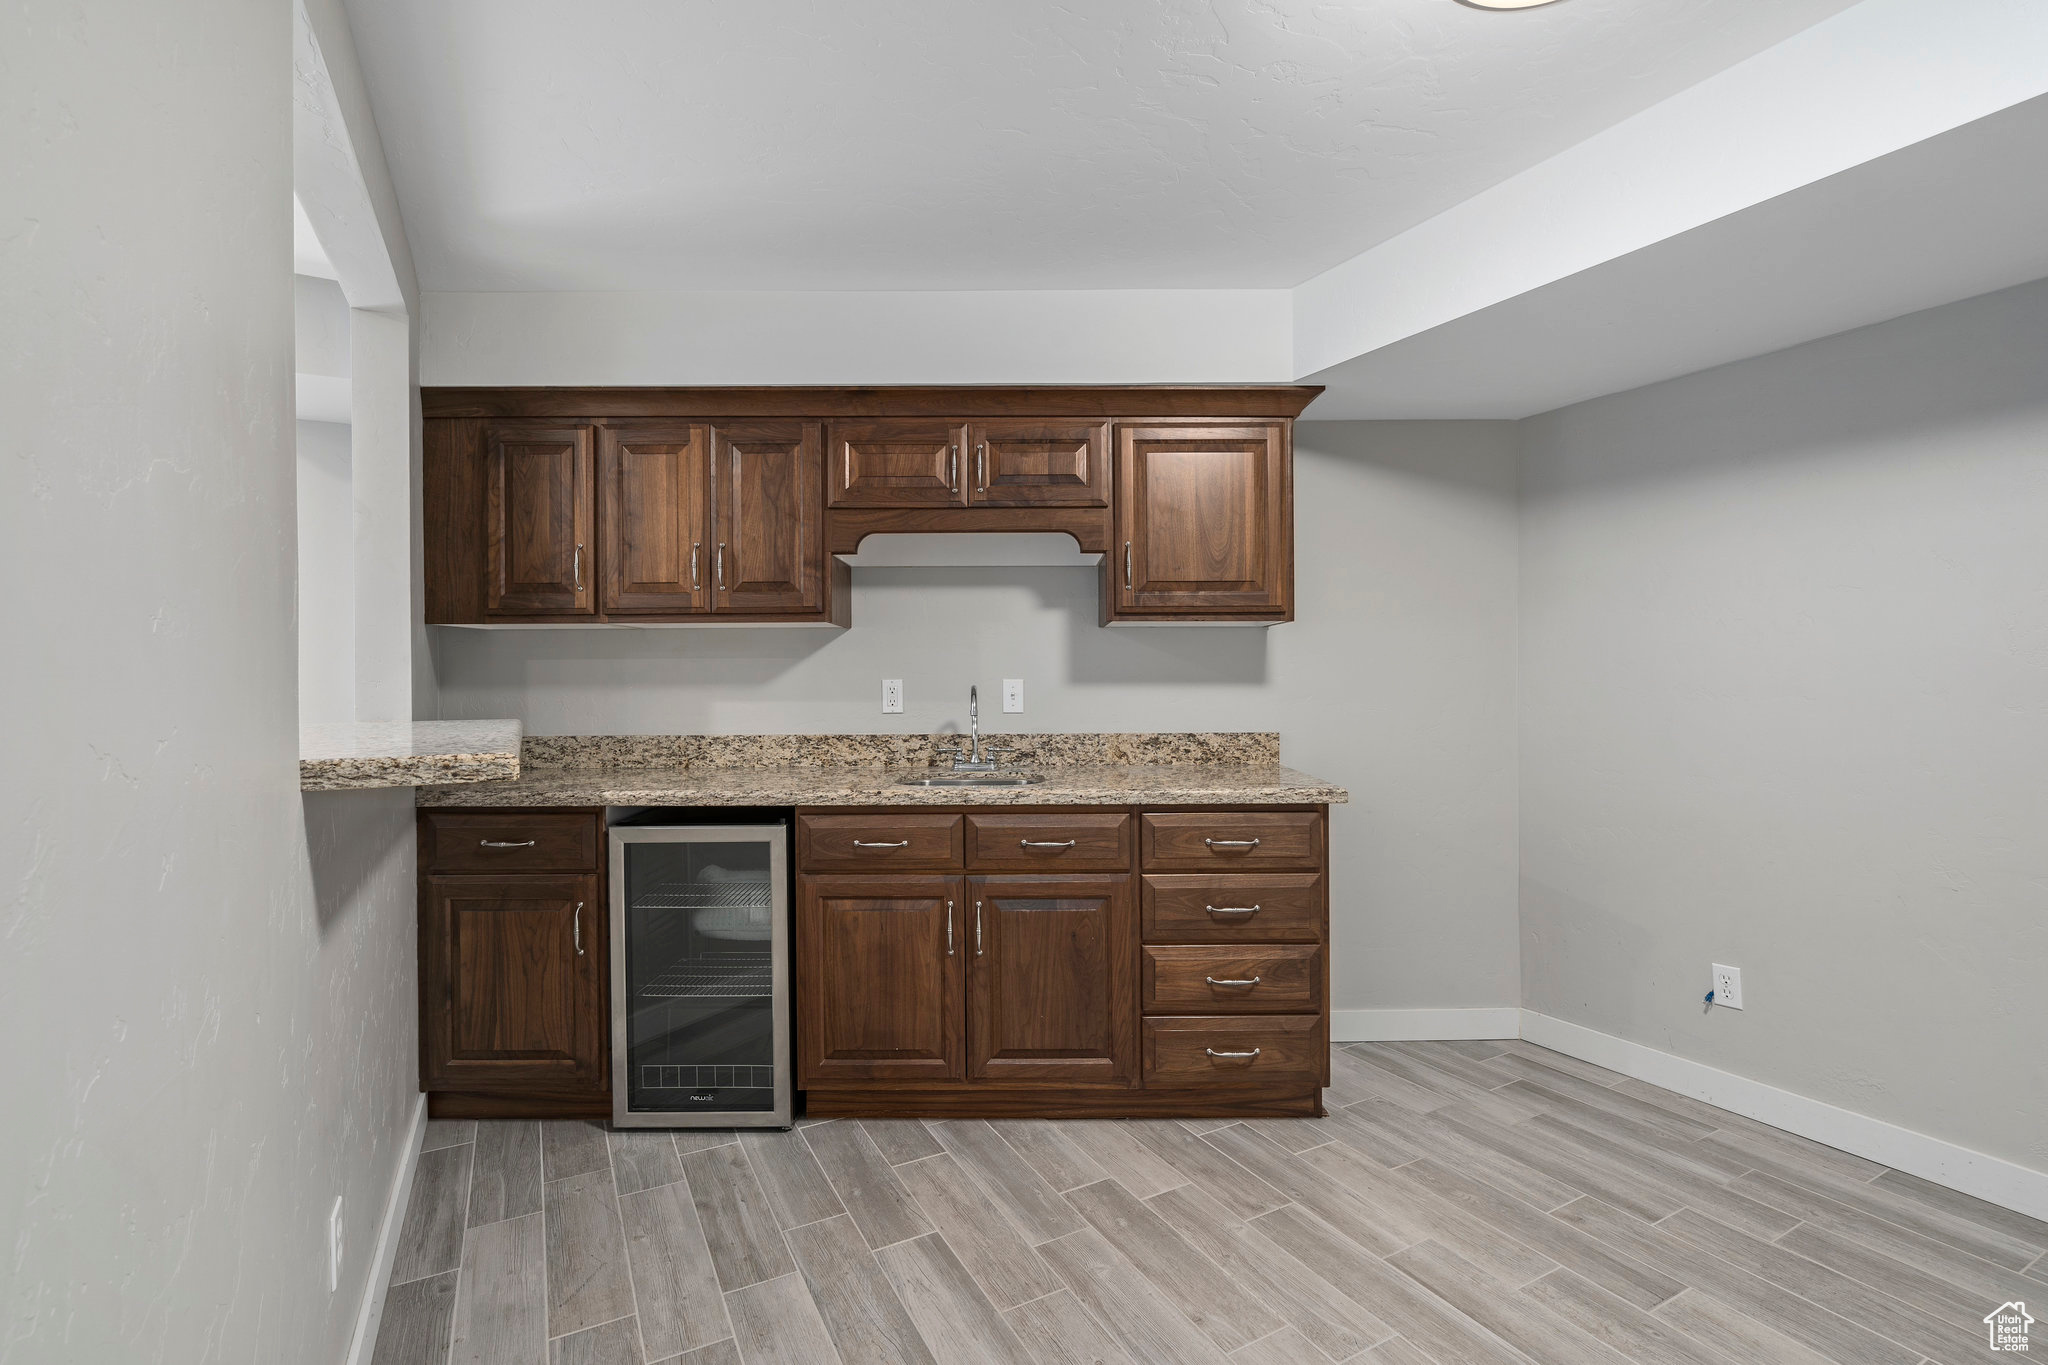 Basement kitchenette with murphy bed attached on adjacent wall. Room has light wood-style flooring, light granite countertops, beverage cooler, and dark brown cabinetry